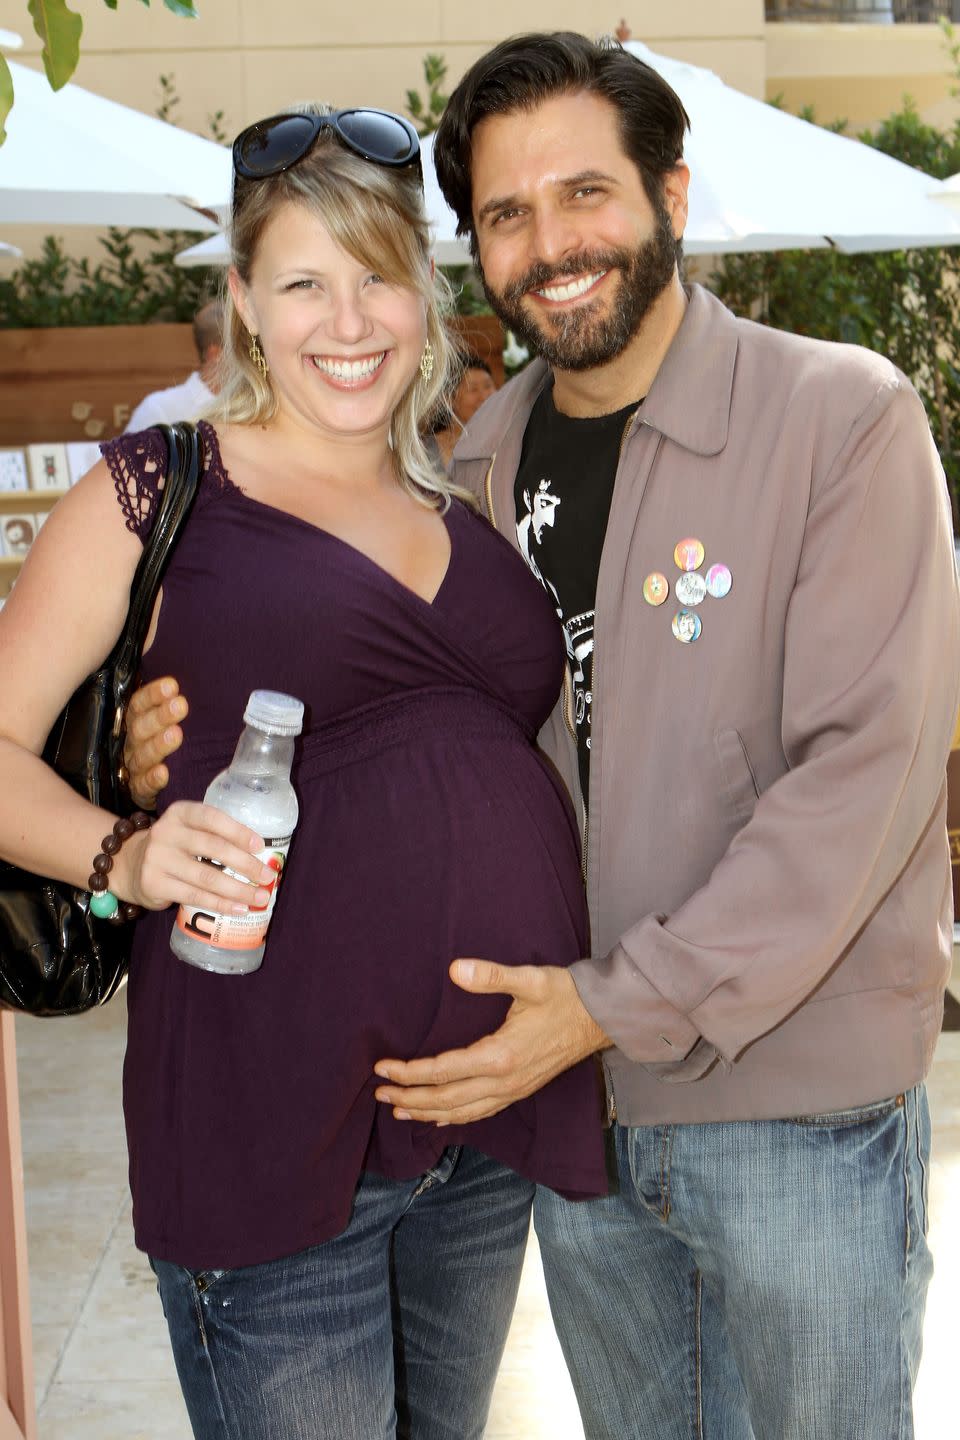 Jodie Sweetin and Morty Cole